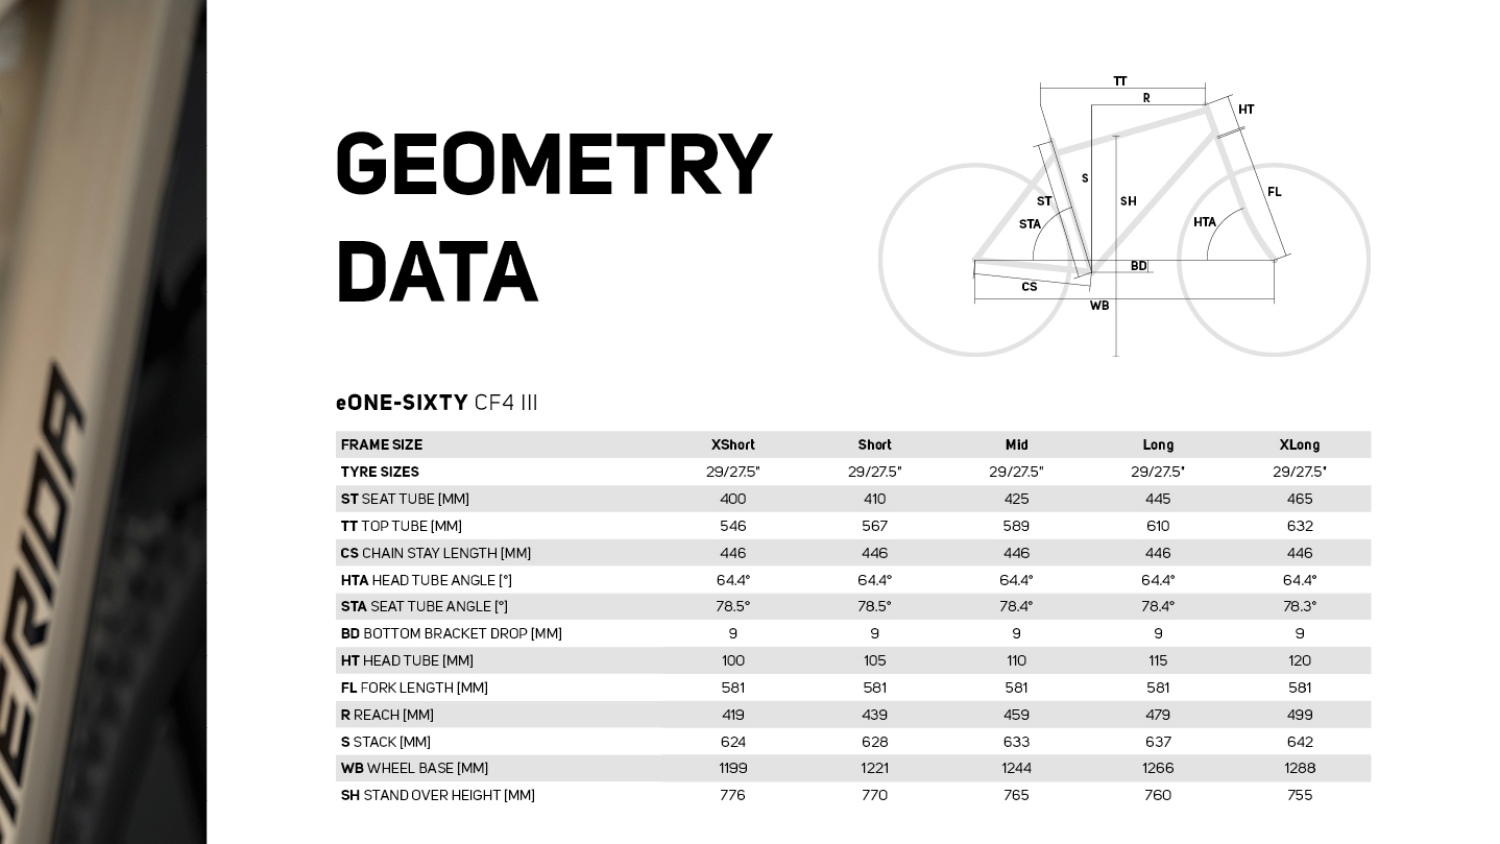 Geometry is the same for the alloy and carbon Merida eOne-Sixty